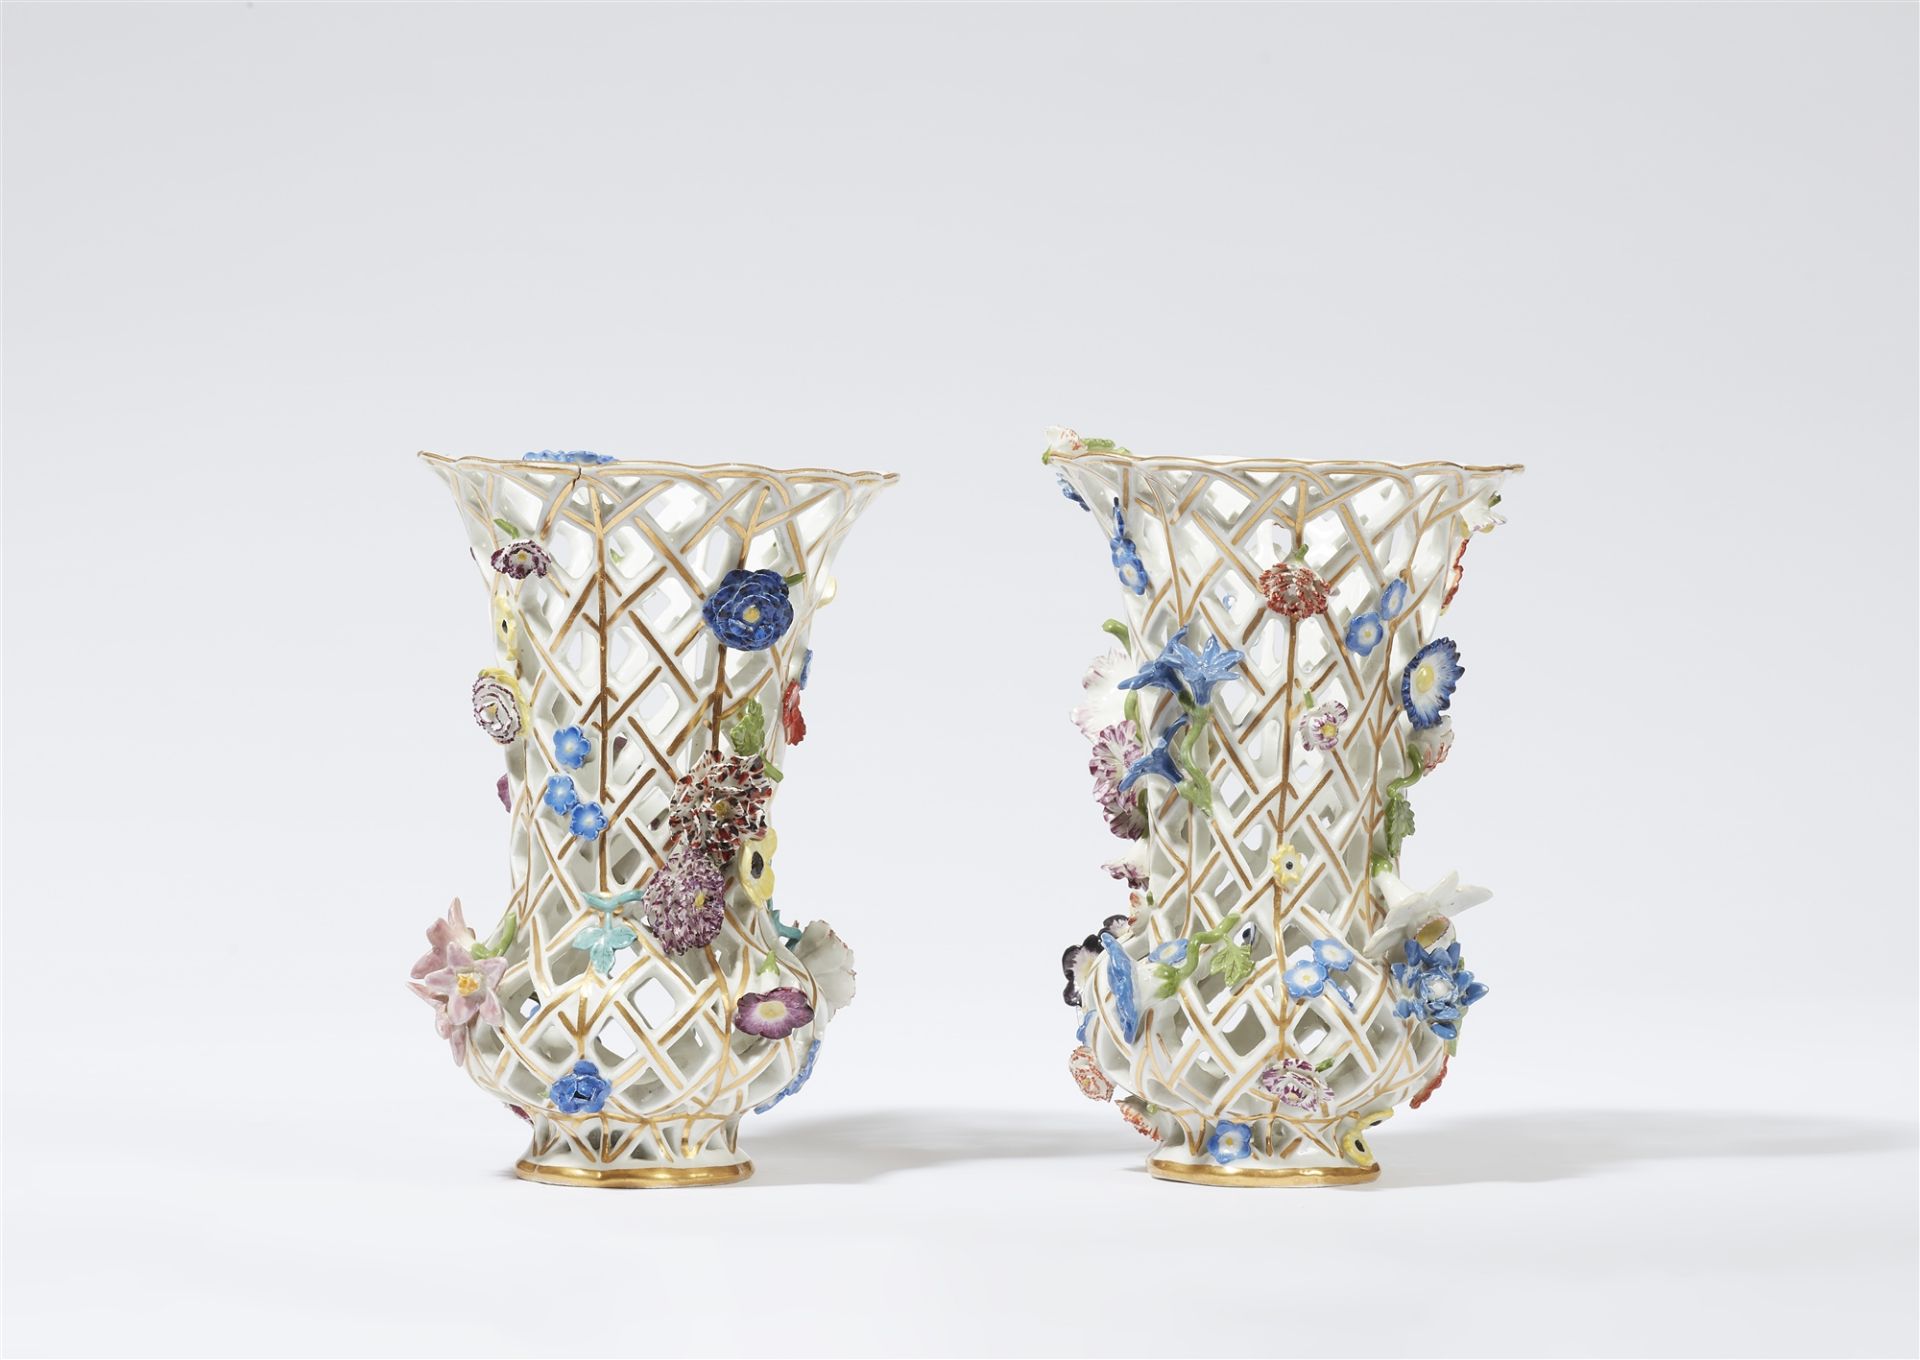 A pair of Meissen porcelain vases with floral appliques - Image 2 of 2